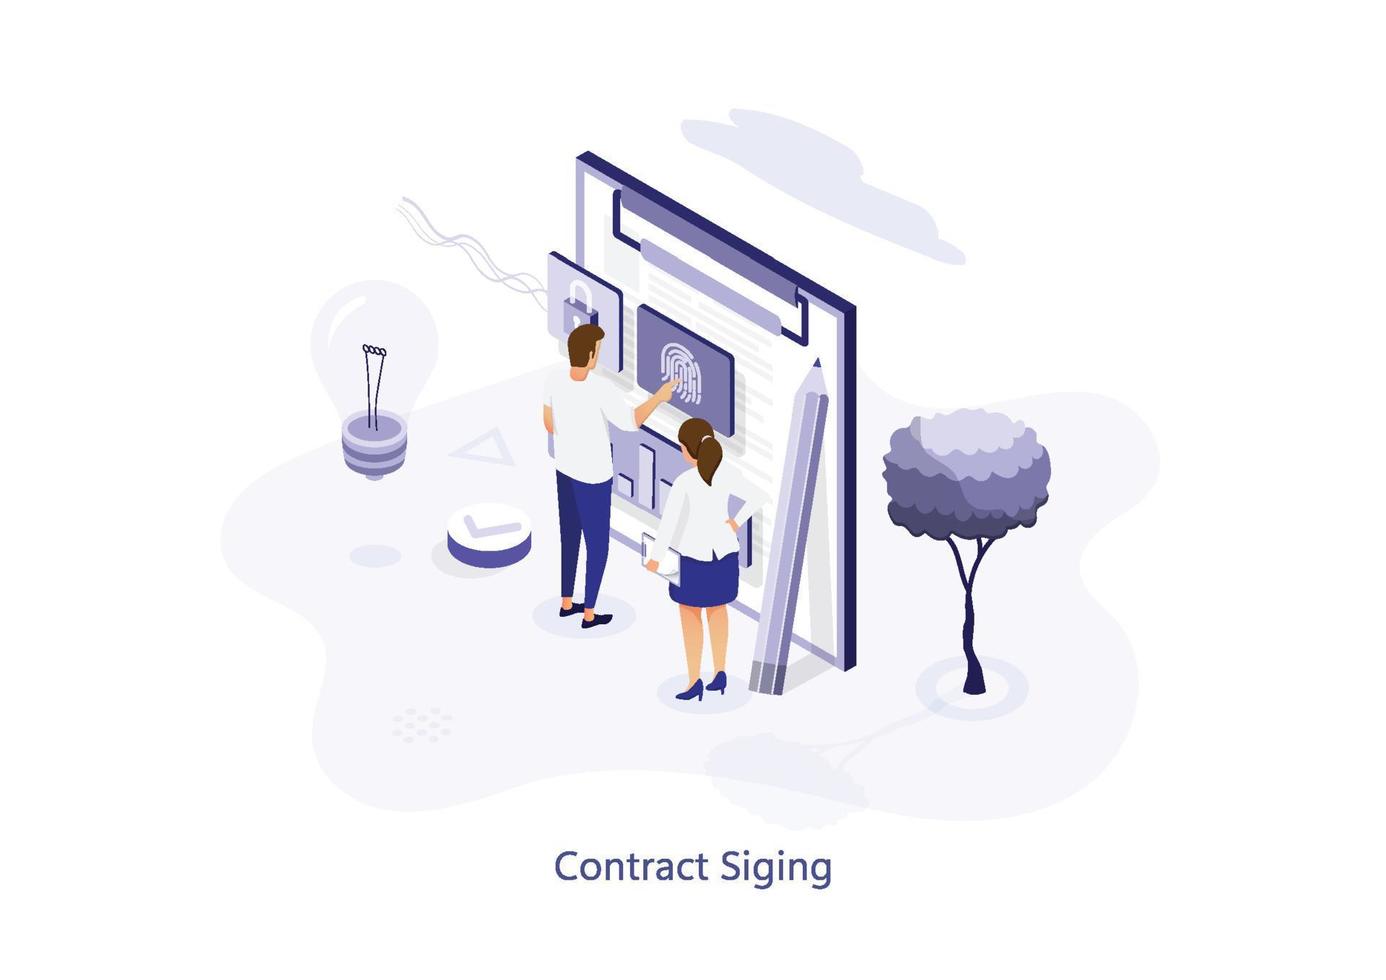 Business people signing contract online. Isometric businessman submitting fingerprint scan over clipboard. Employment, deal, partnership concept for banner, website desig vector